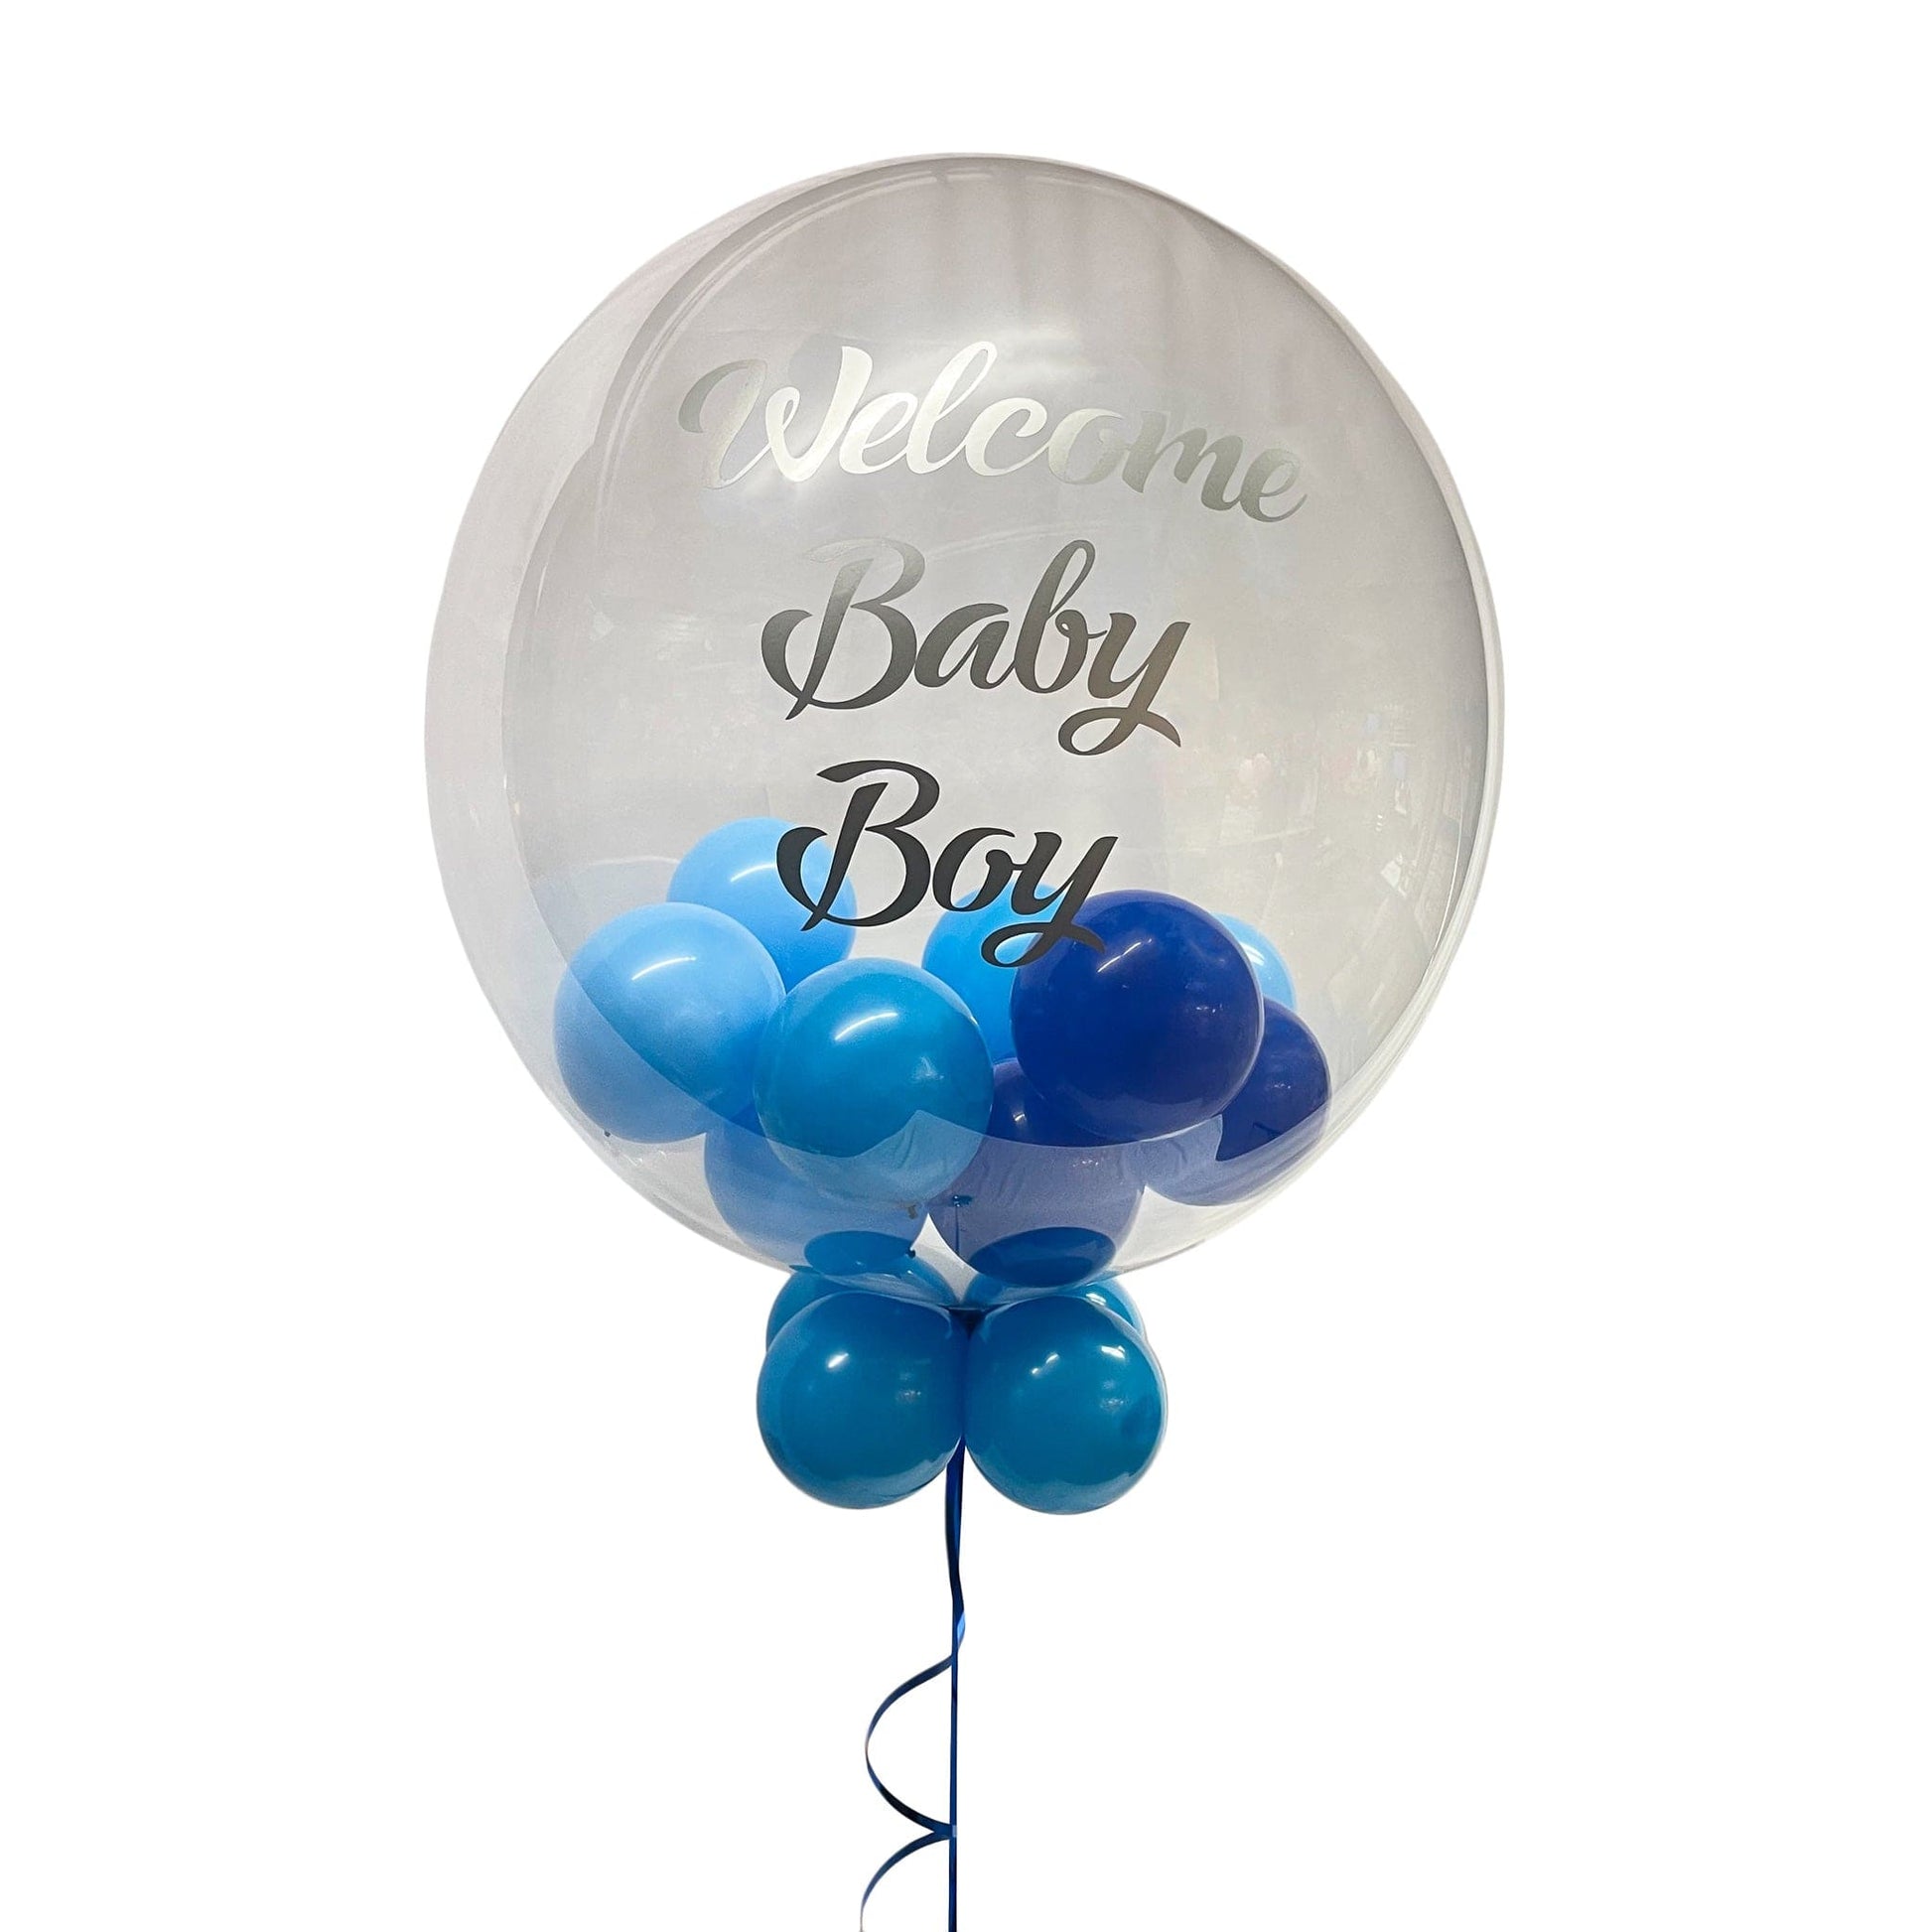 Castle Balloons Balloons Blue Rose Bubble with Vinyl Writing